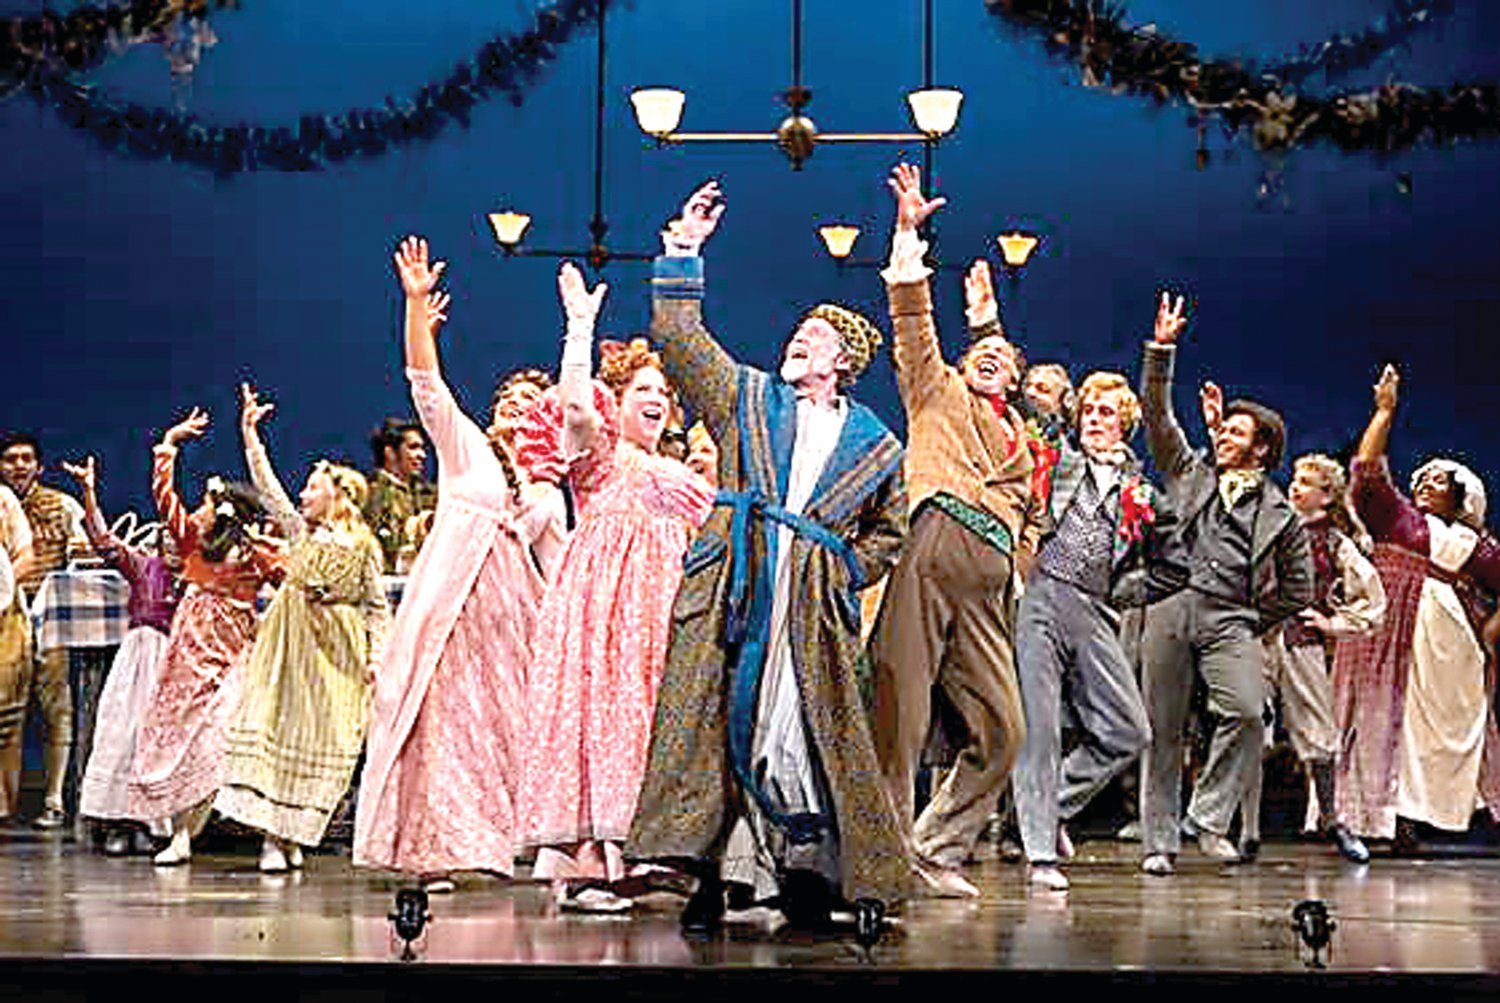 Greg Wood, center, and members of the 2017 “A Christmas Carol” ensemble perform on stage. The 2019 show runs through Dec. 29. Photograph by T. Charles Erickson.